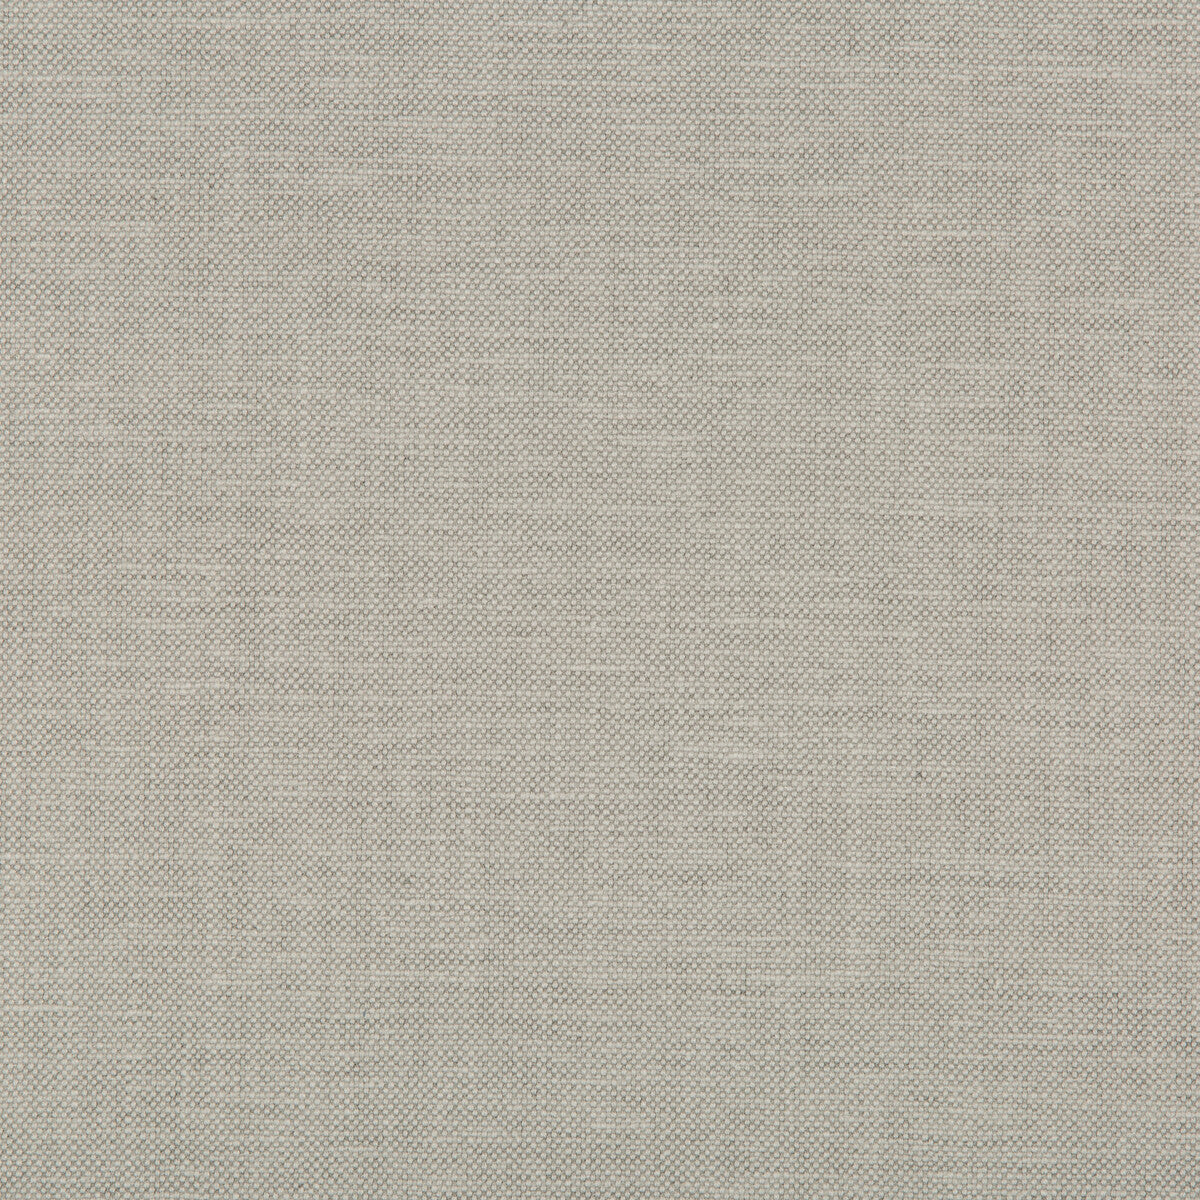 Oxfordian fabric in stone color - pattern 35543.106.0 - by Kravet Basics in the Bermuda collection